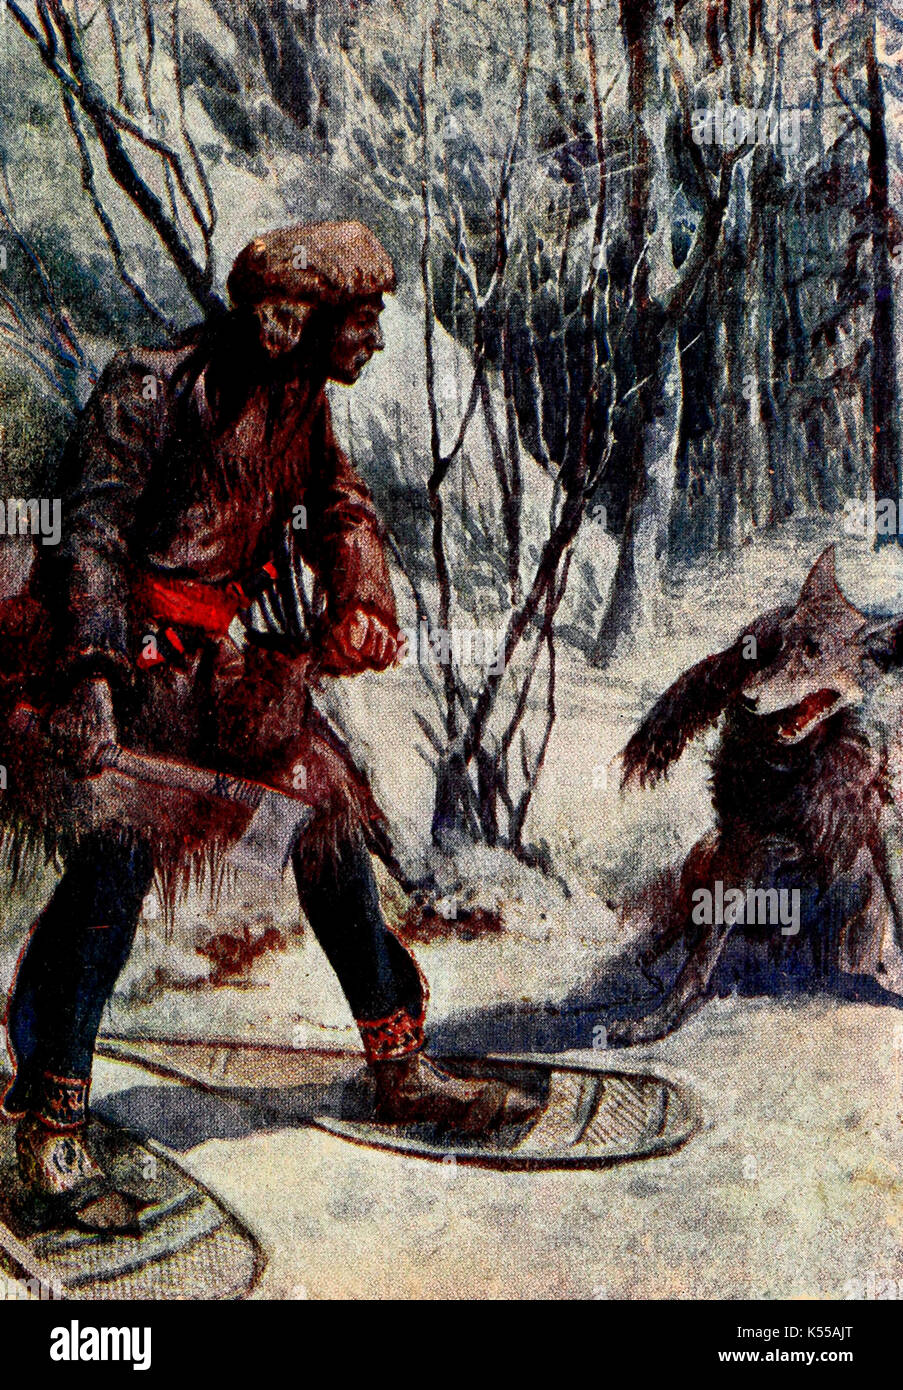 A large wolf bounds towards him, landing almost at his feet - Fur trapper being attacked, circa 1700 Stock Photo